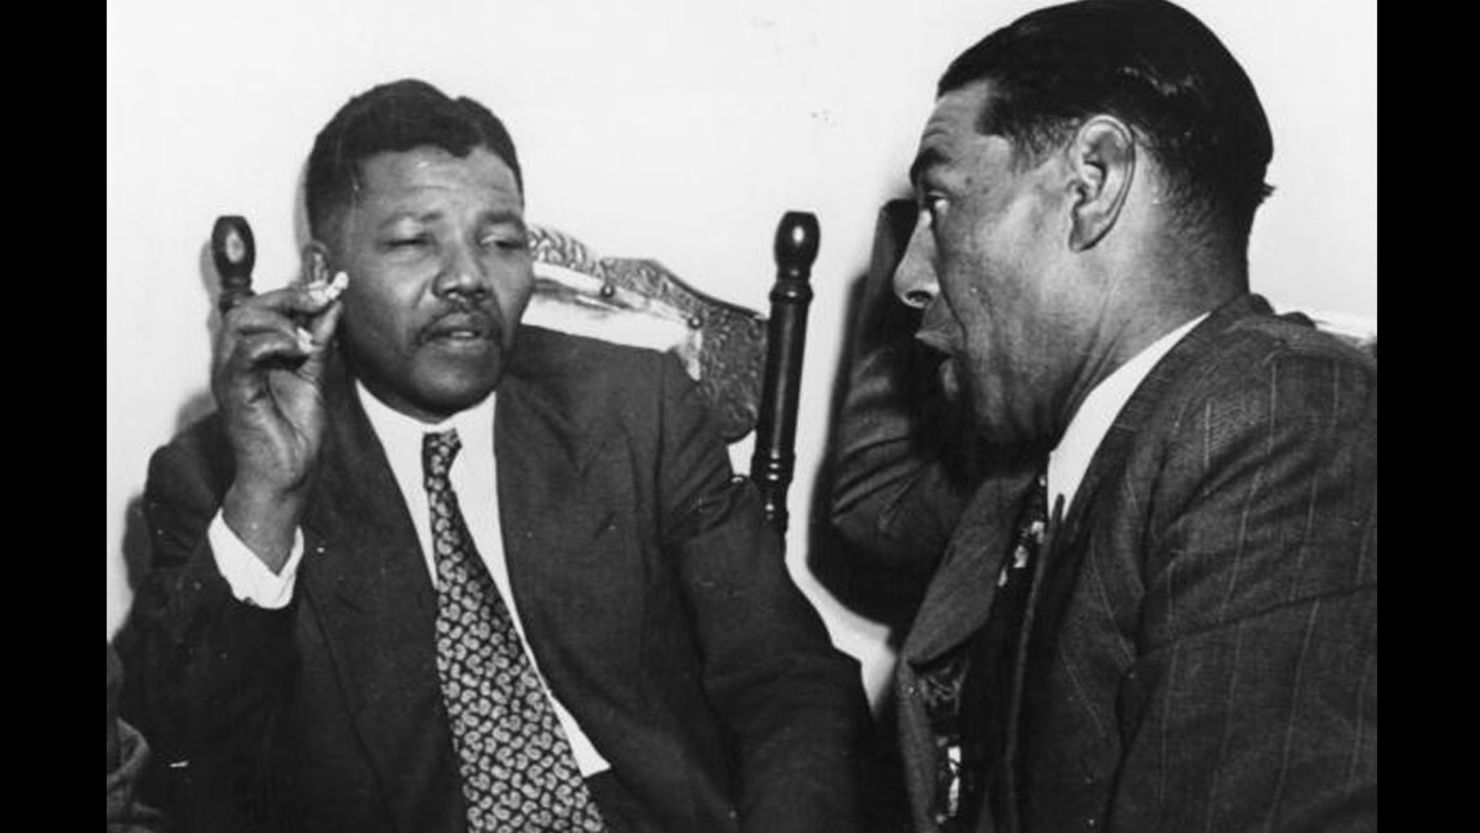 Nelson Mandela, then-president of the African National Congress, left, speaks with a teacher sometime in 1964.